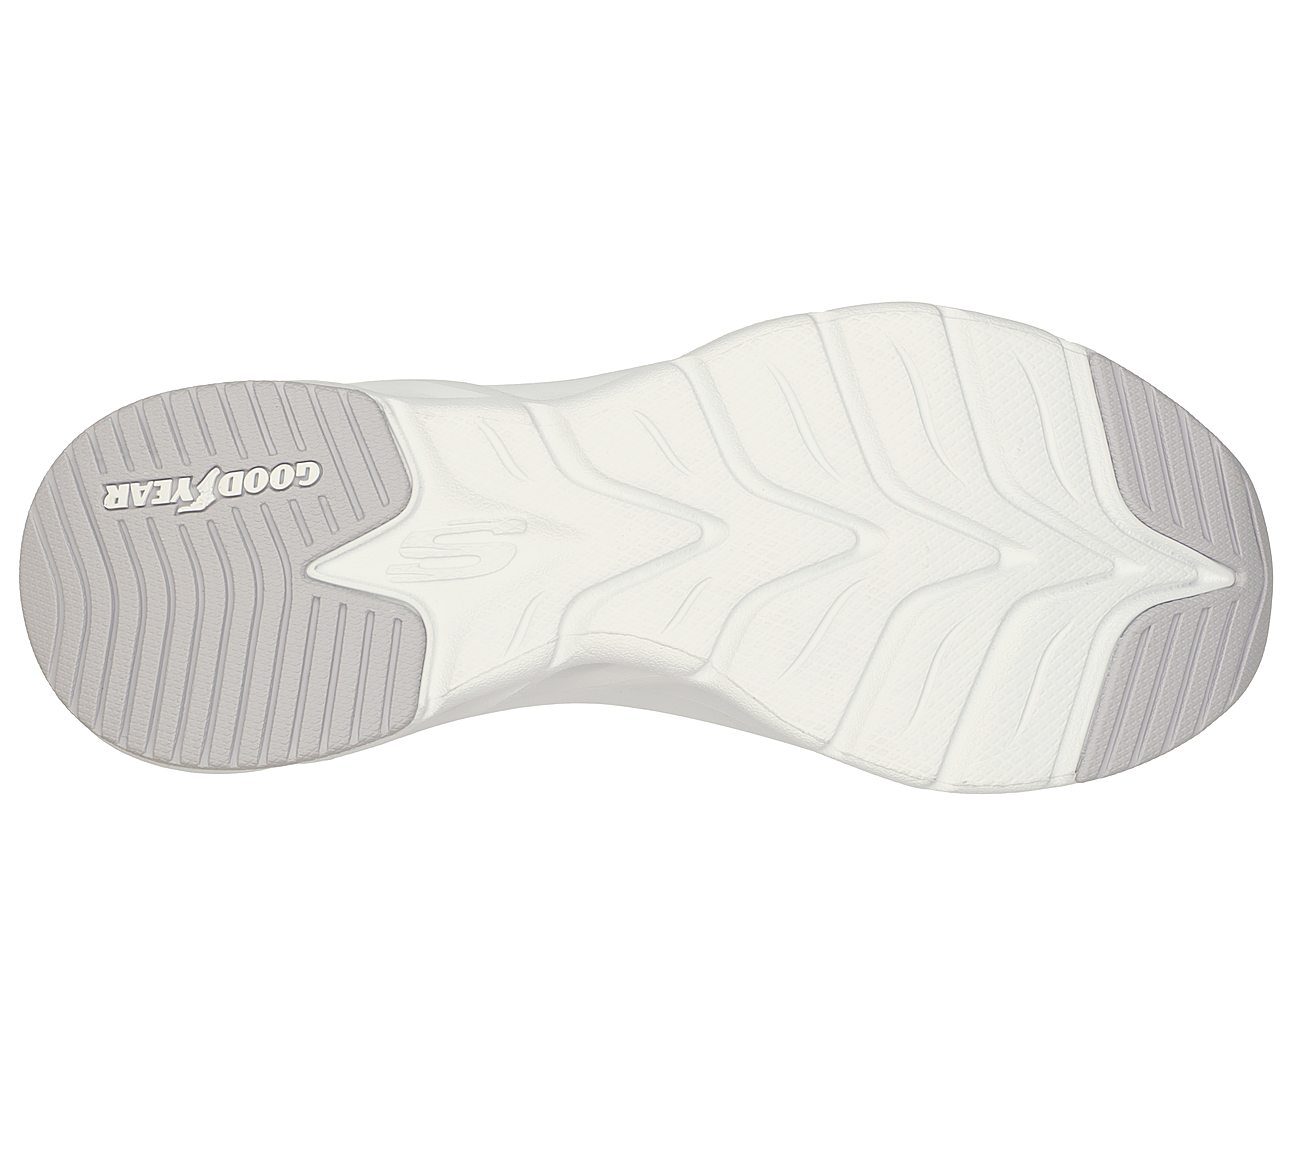 ARCH FIT GLIDE-STEP, WHITE/MULTI Footwear Bottom View